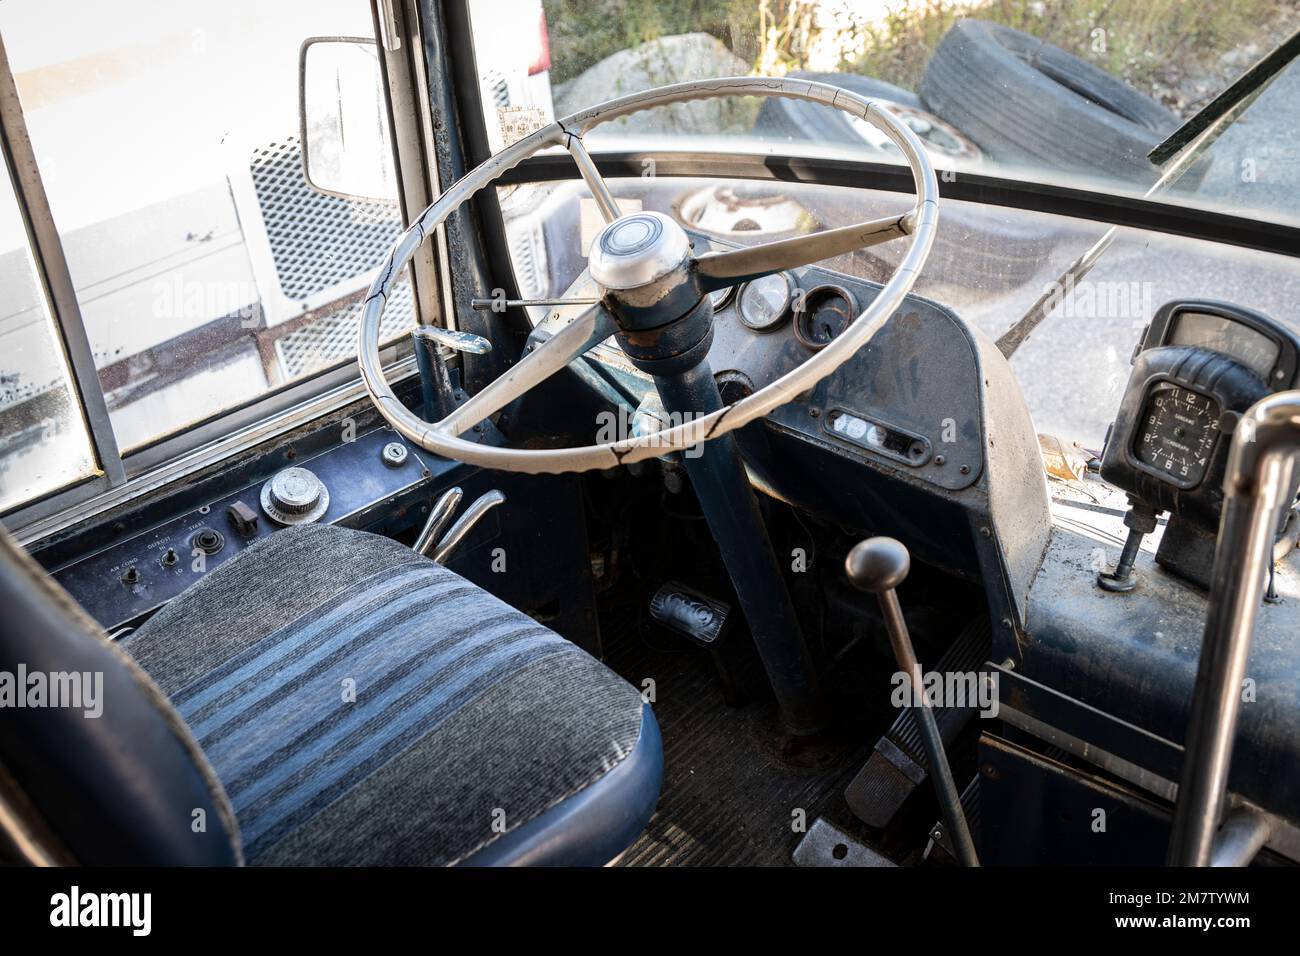 drivers steeringwheel and seat on old transit bus Stock Photo